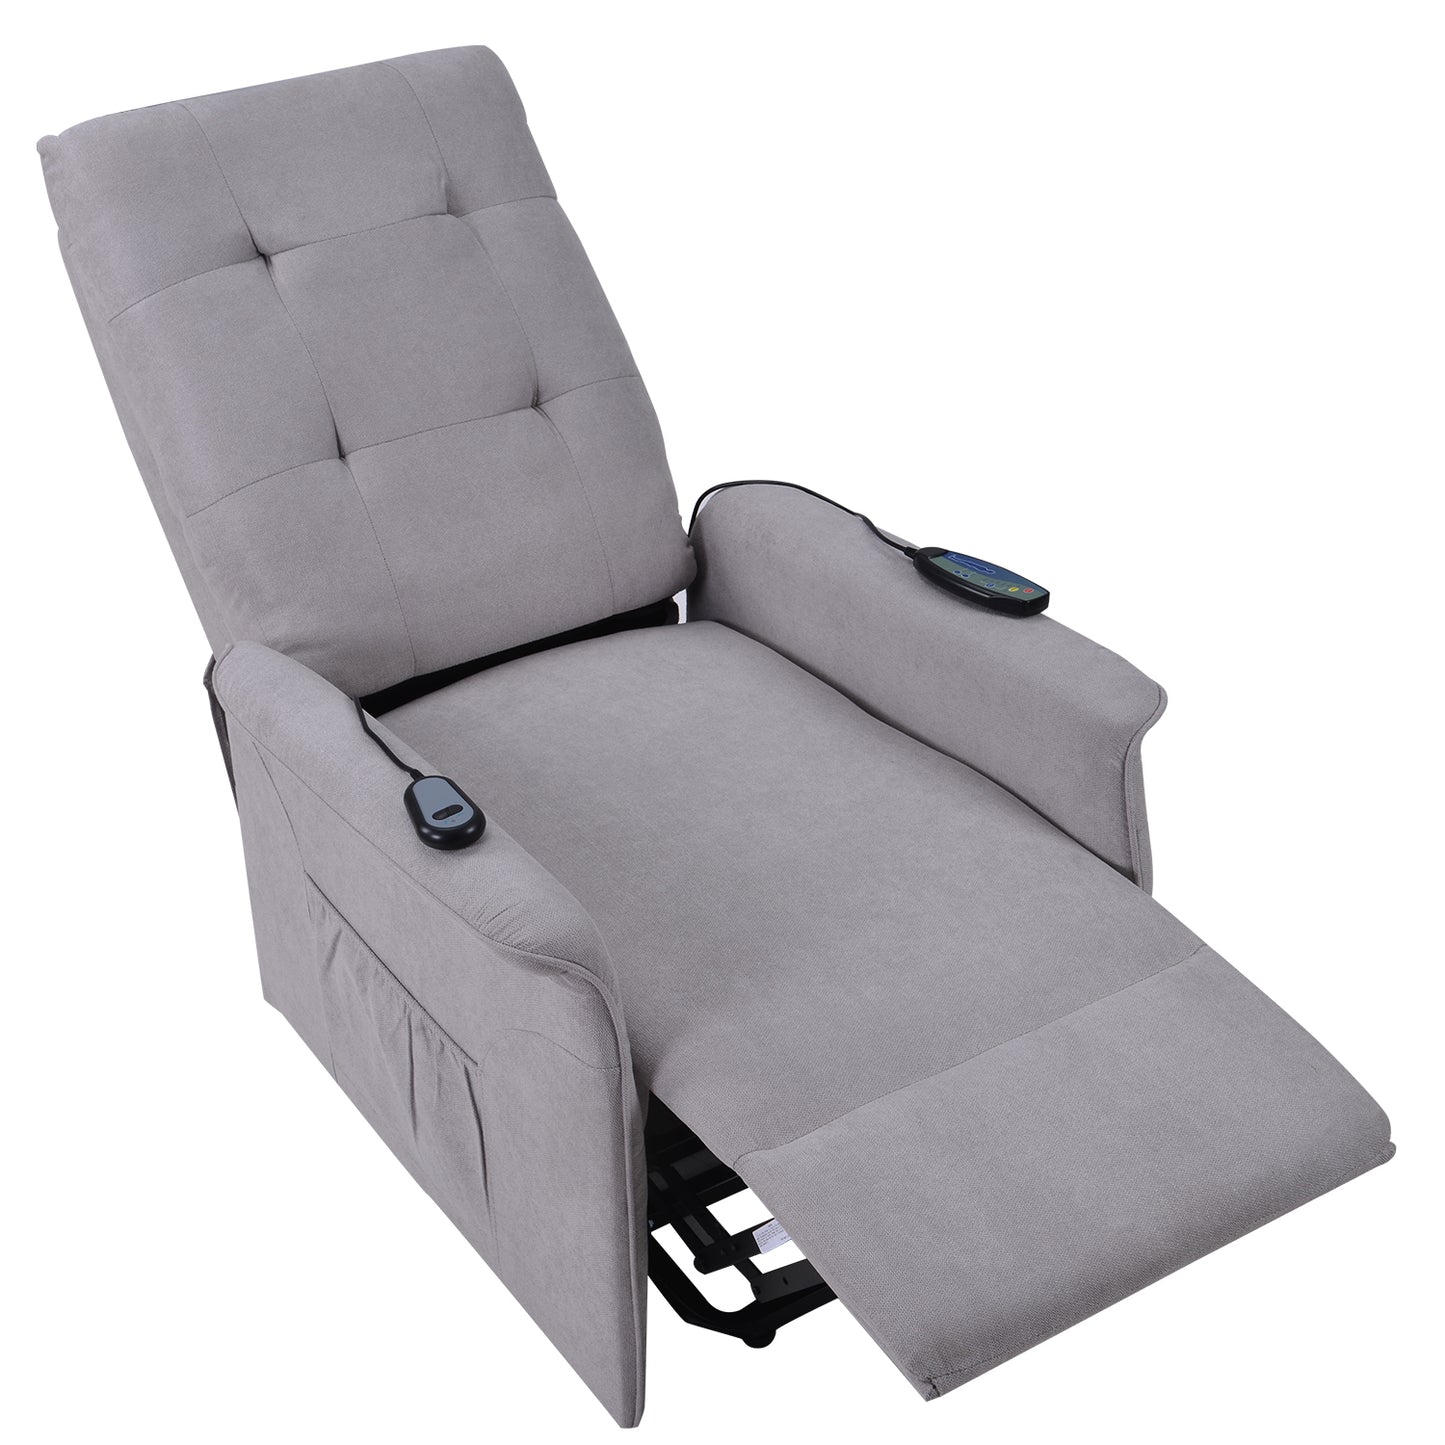 1st Choice Power Lift Chair for Elderly with Adjustable Massage Function